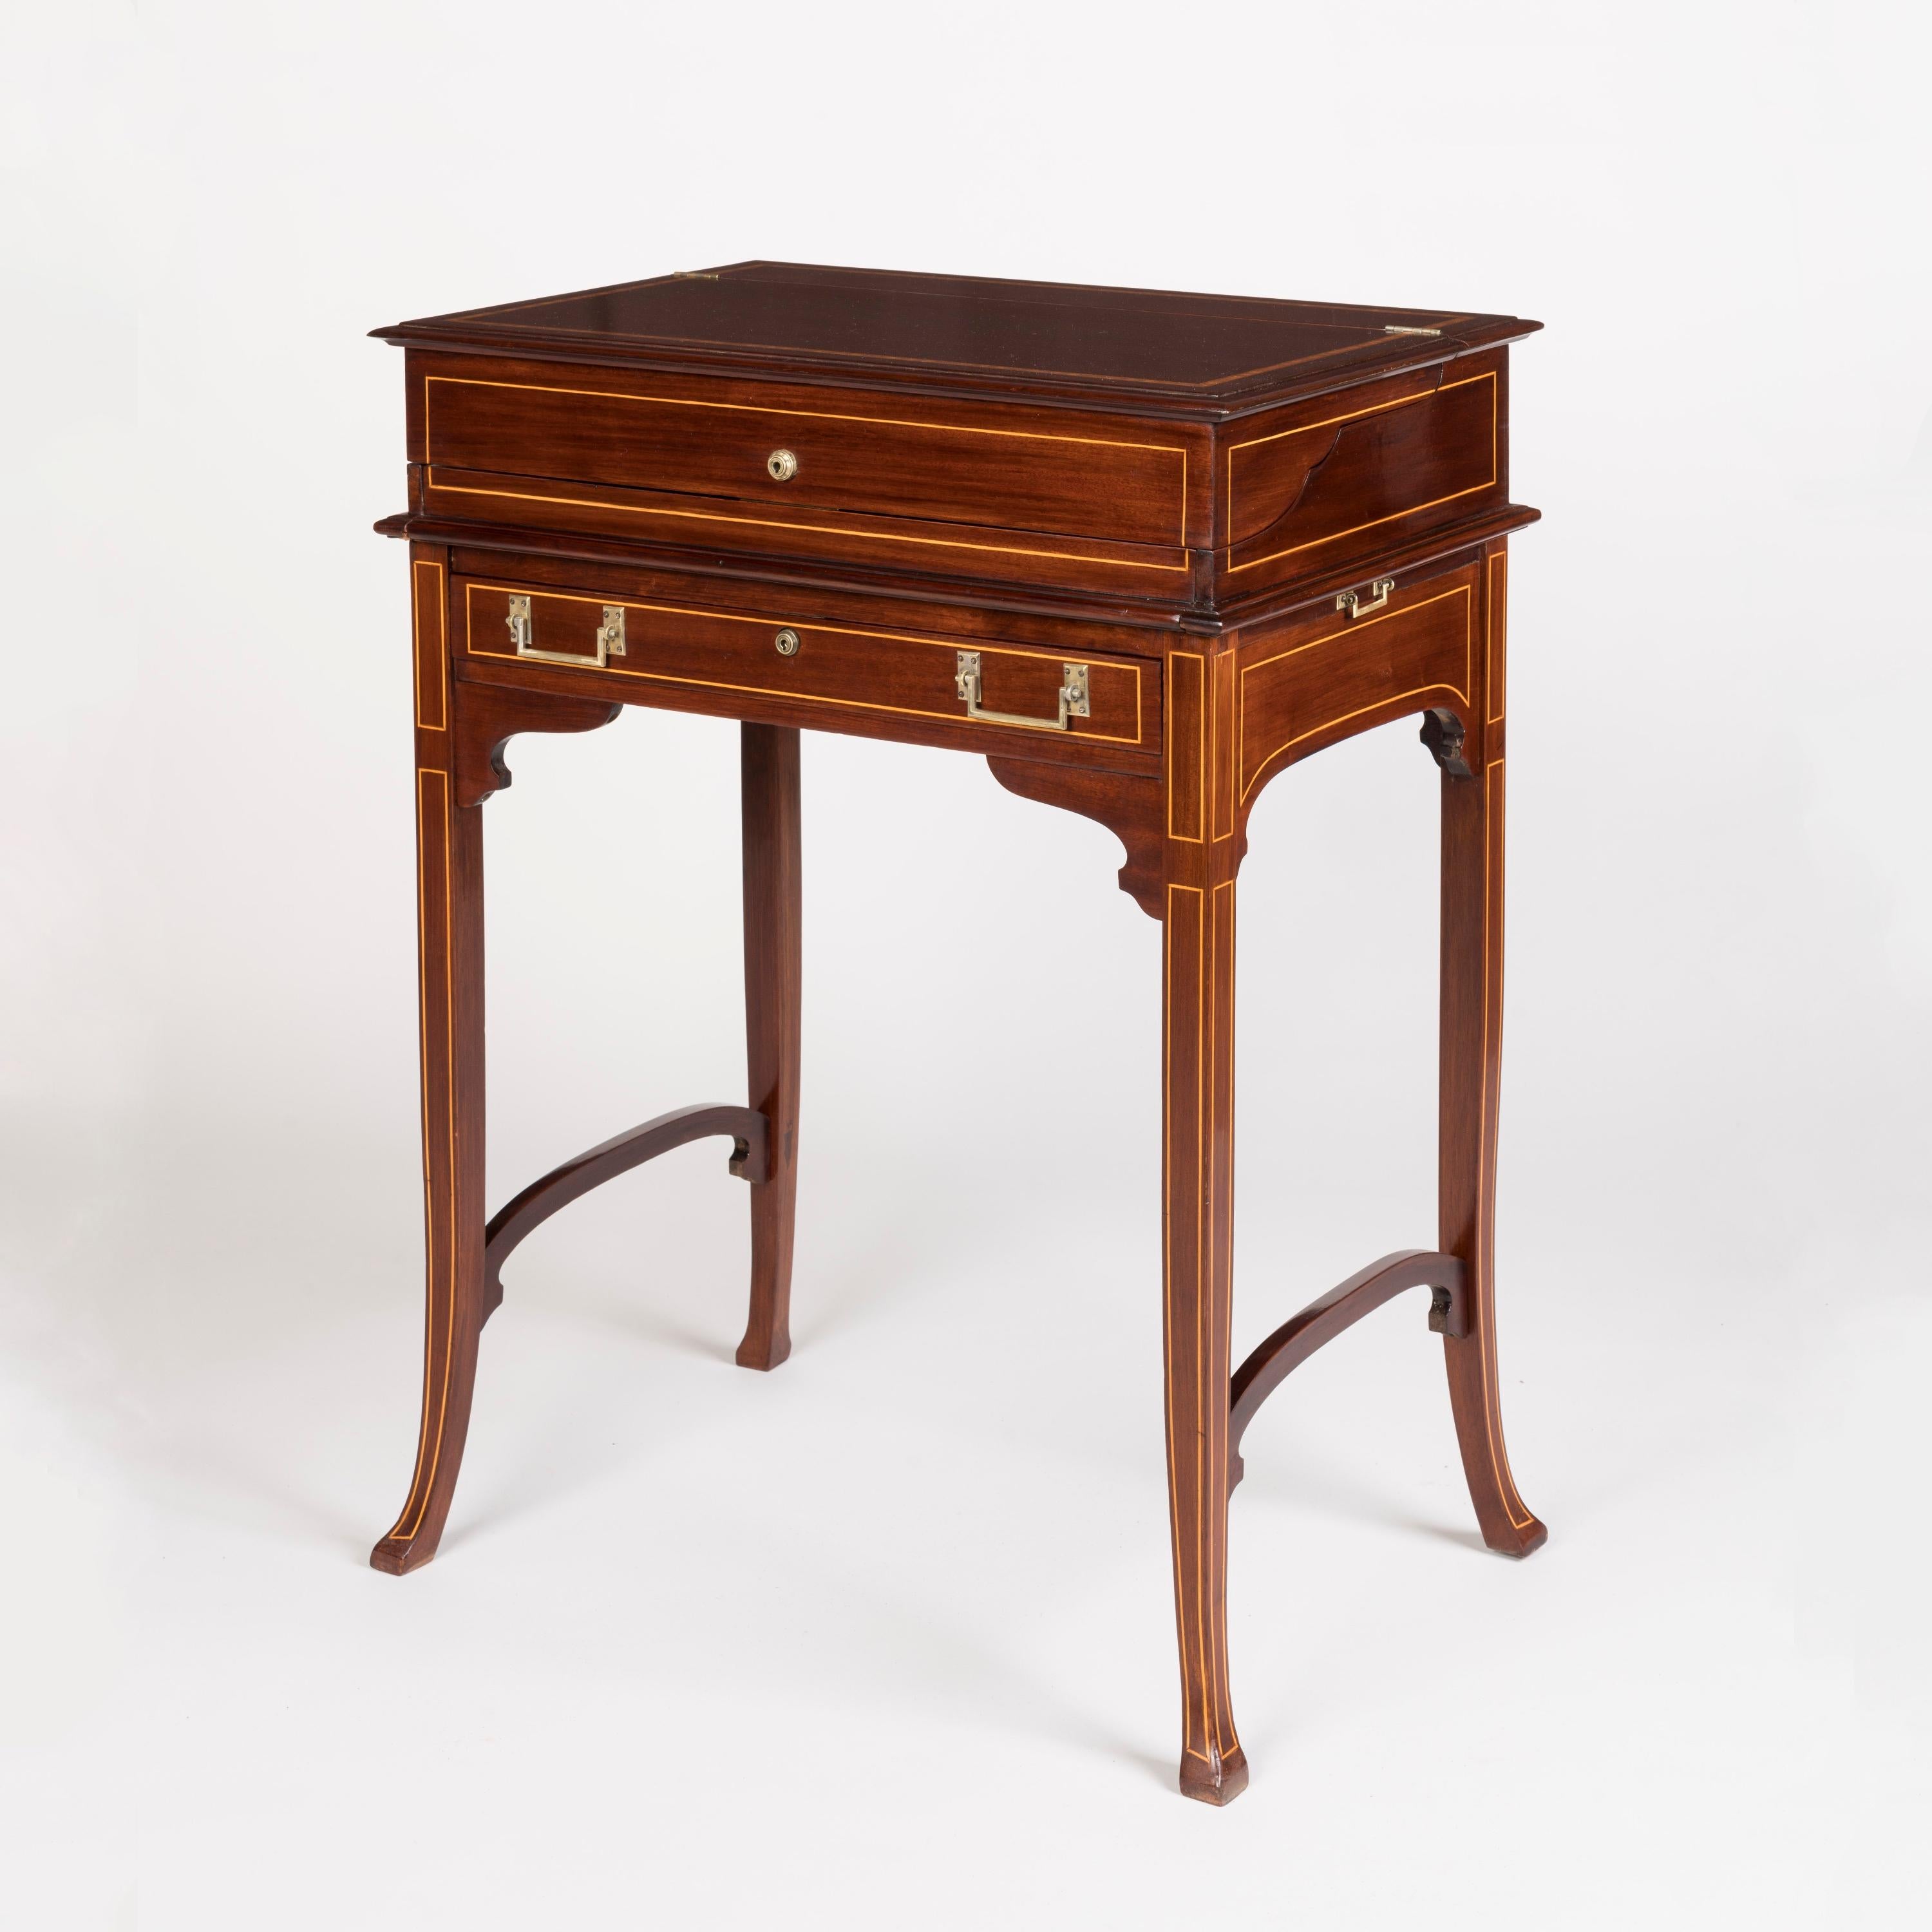 A Fine Edwardian silver-fitted dressing table.

Constructed from mahogany, with boxwood stringing and brass handles, the dressing table supported on splayed legs with stretchers and spandrels; the hinged top opening to reveal a velvet-lined and